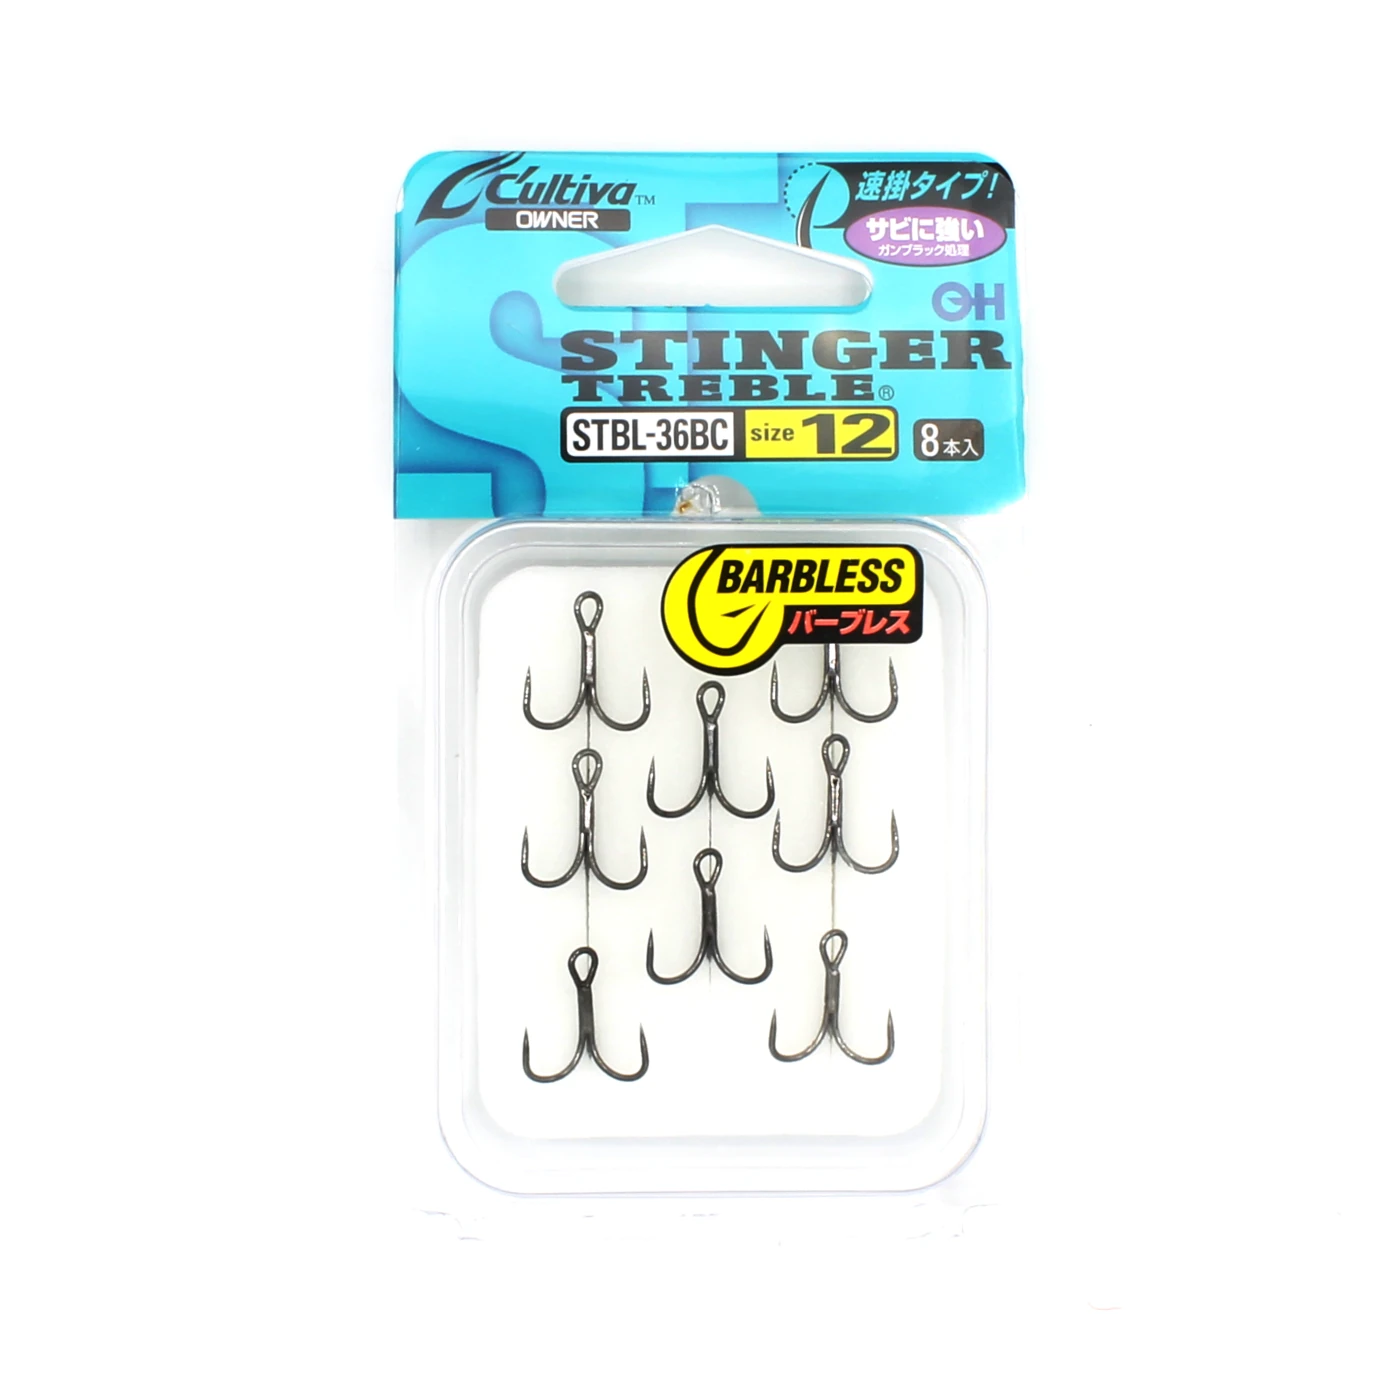 R18-B Barbless 2x Strong (20 Pack)